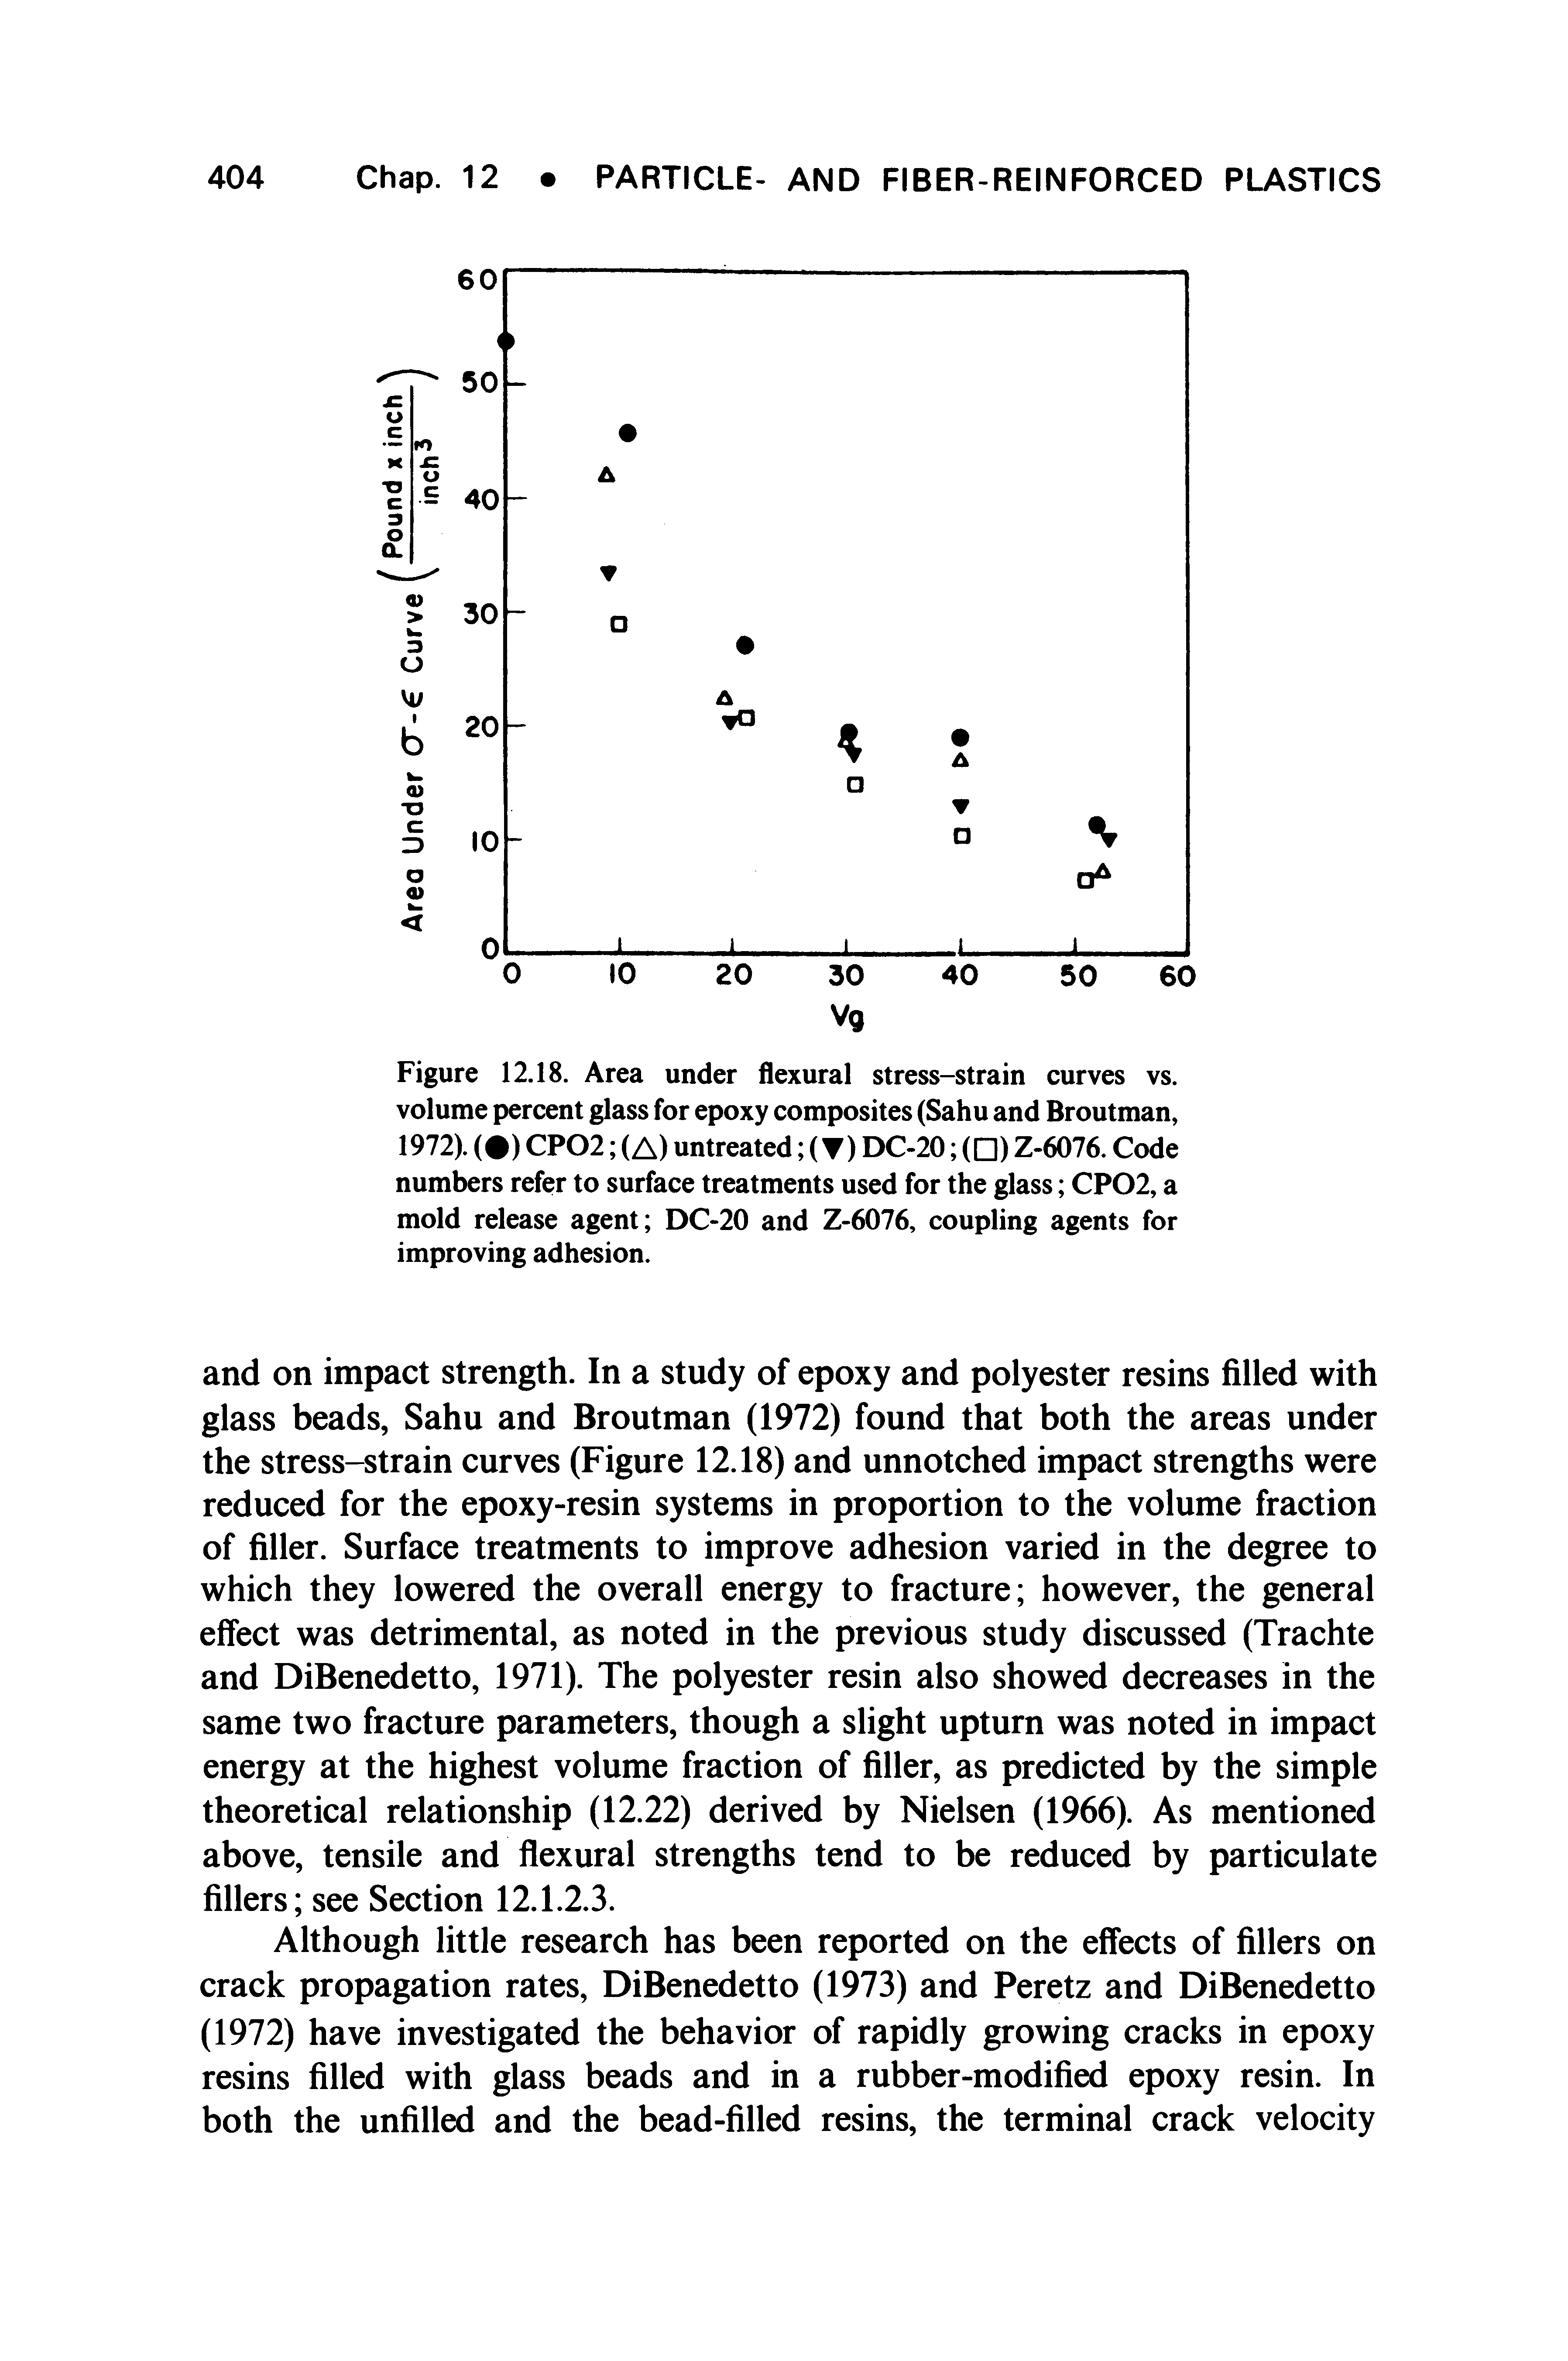 Figure 12.18. Area under flexural stress-strain curves vs. volume percent glass for epoxy composites (Sahu and Broutman, 1972). ( ) CP02 (A) untreated ( ) DC-20 ( ) Z-6076. Code numbers refer to surface treatments used for the glass CP02, a mold release agent DC-20 and Z-6076, coupling agents for improving adhesion.